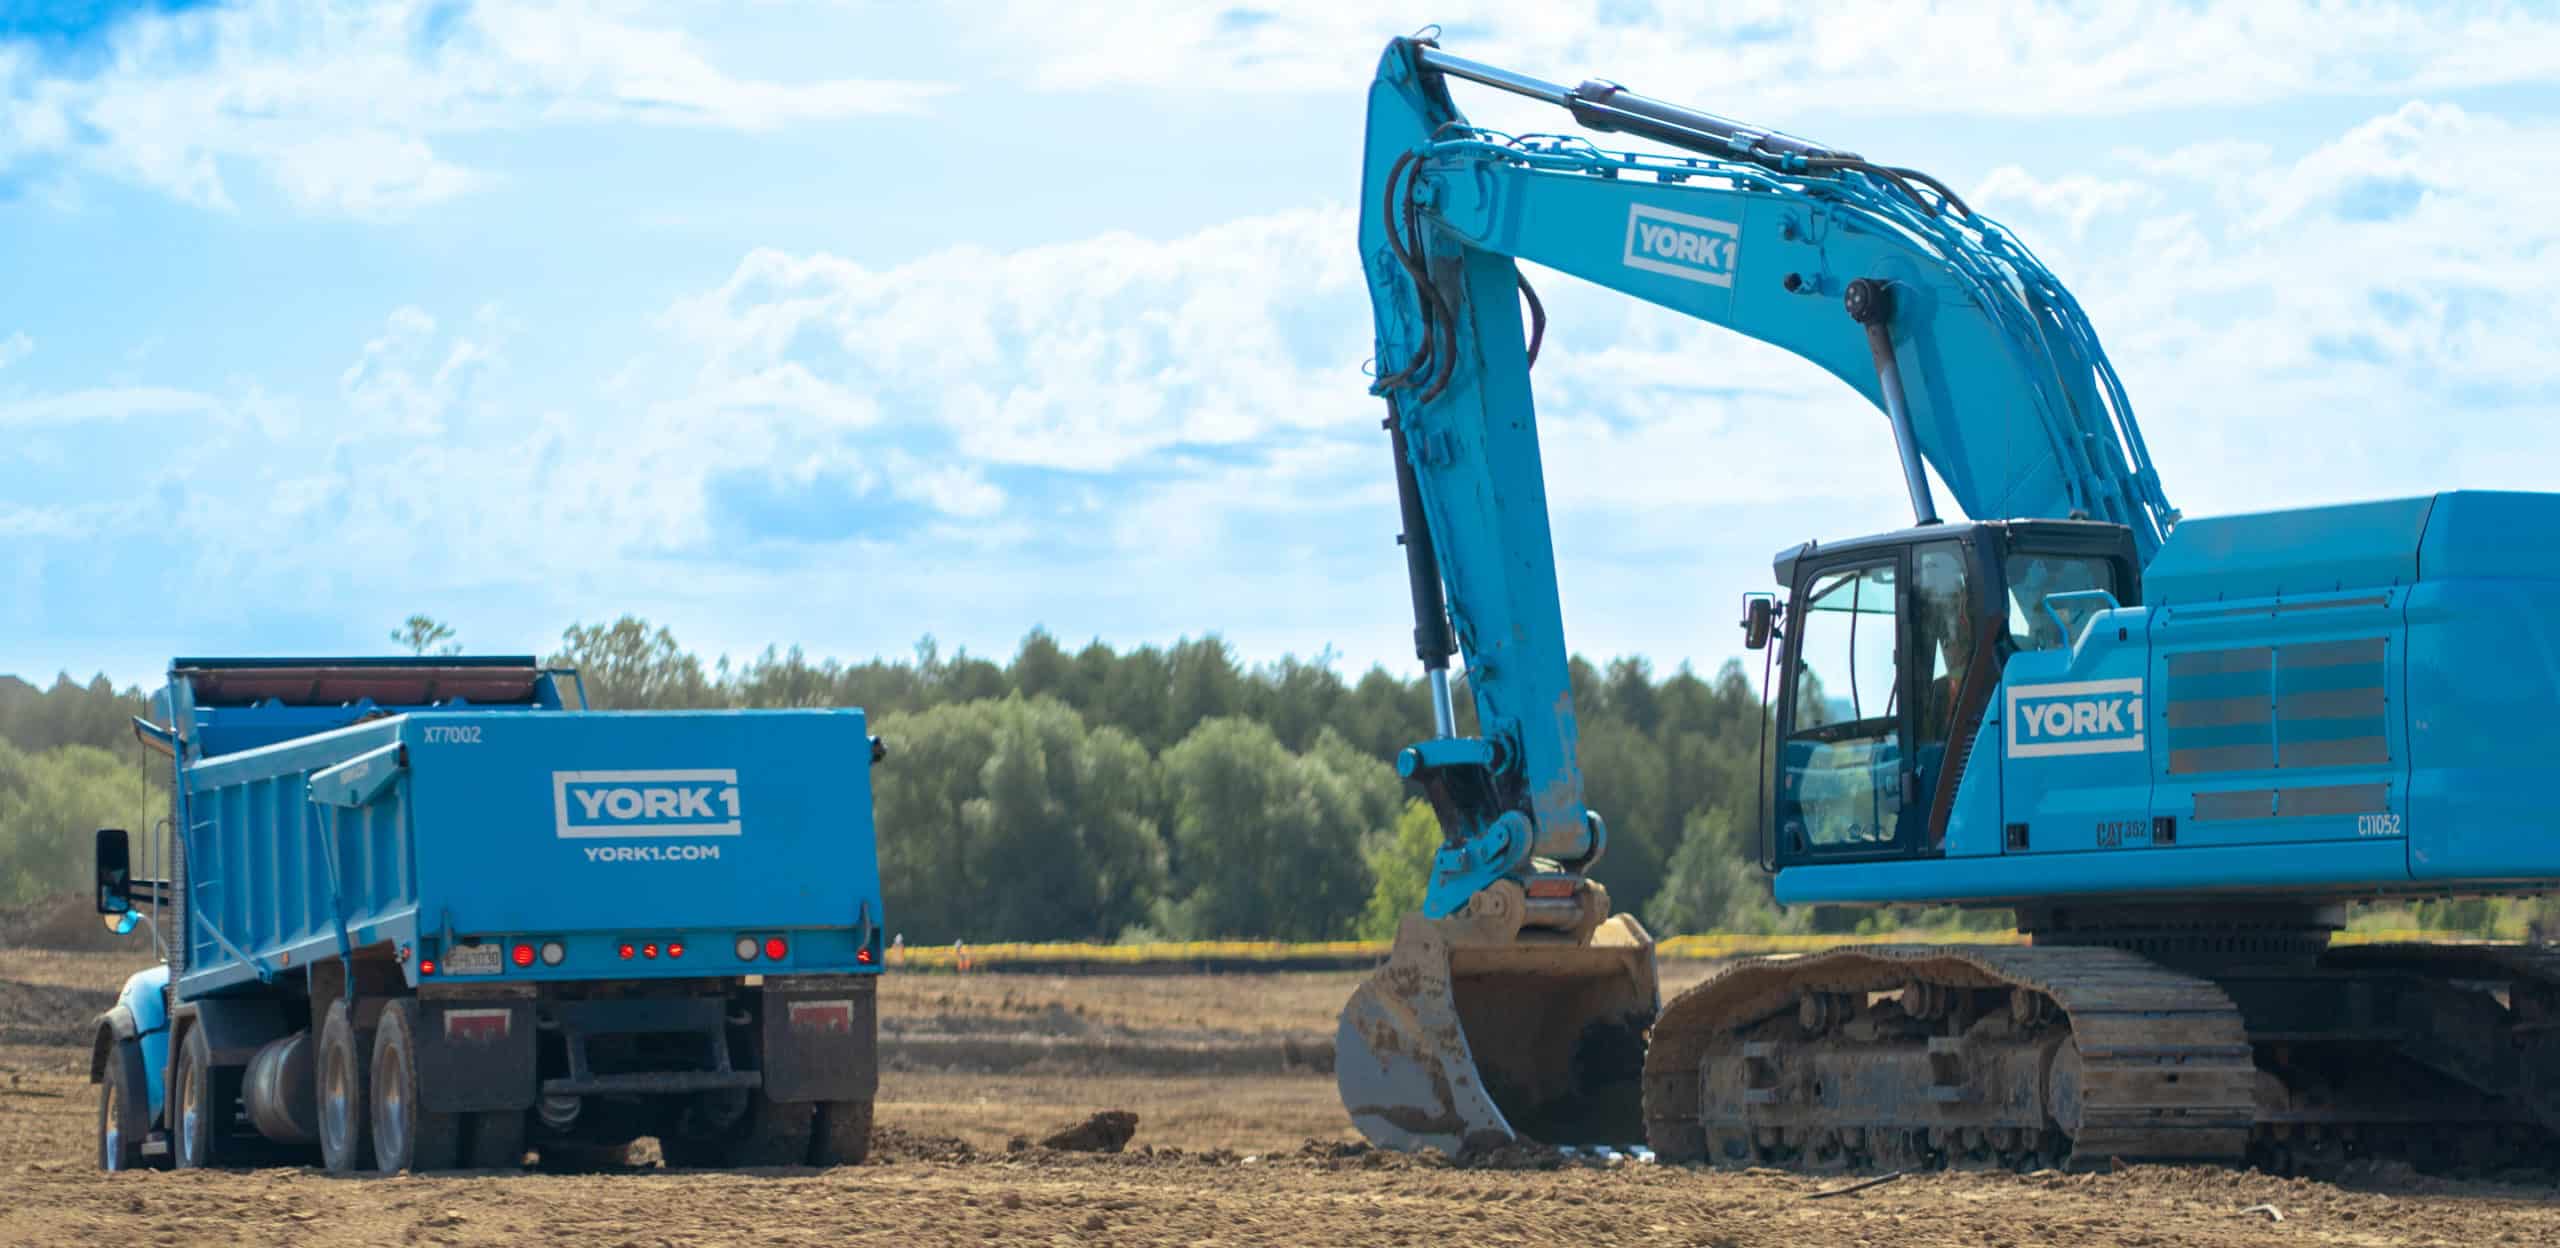 A cyan York1 excavator is loading dirt into a cyan York1 dump truck in an open field with trees in the background.